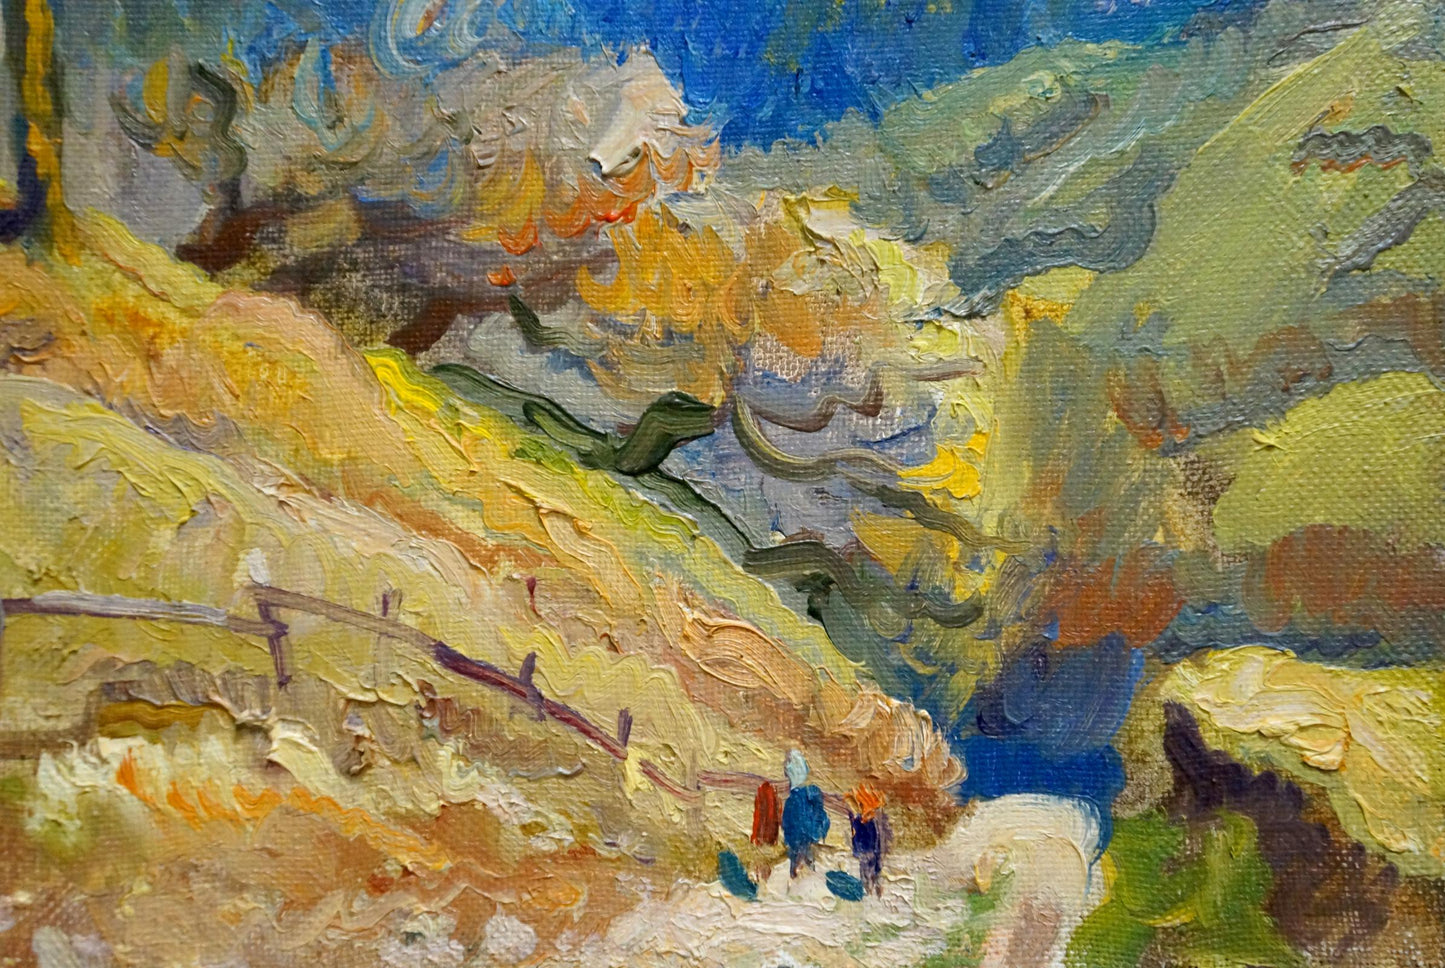 Oil painting House in the mountain range Mynka Alexander Fedorovich